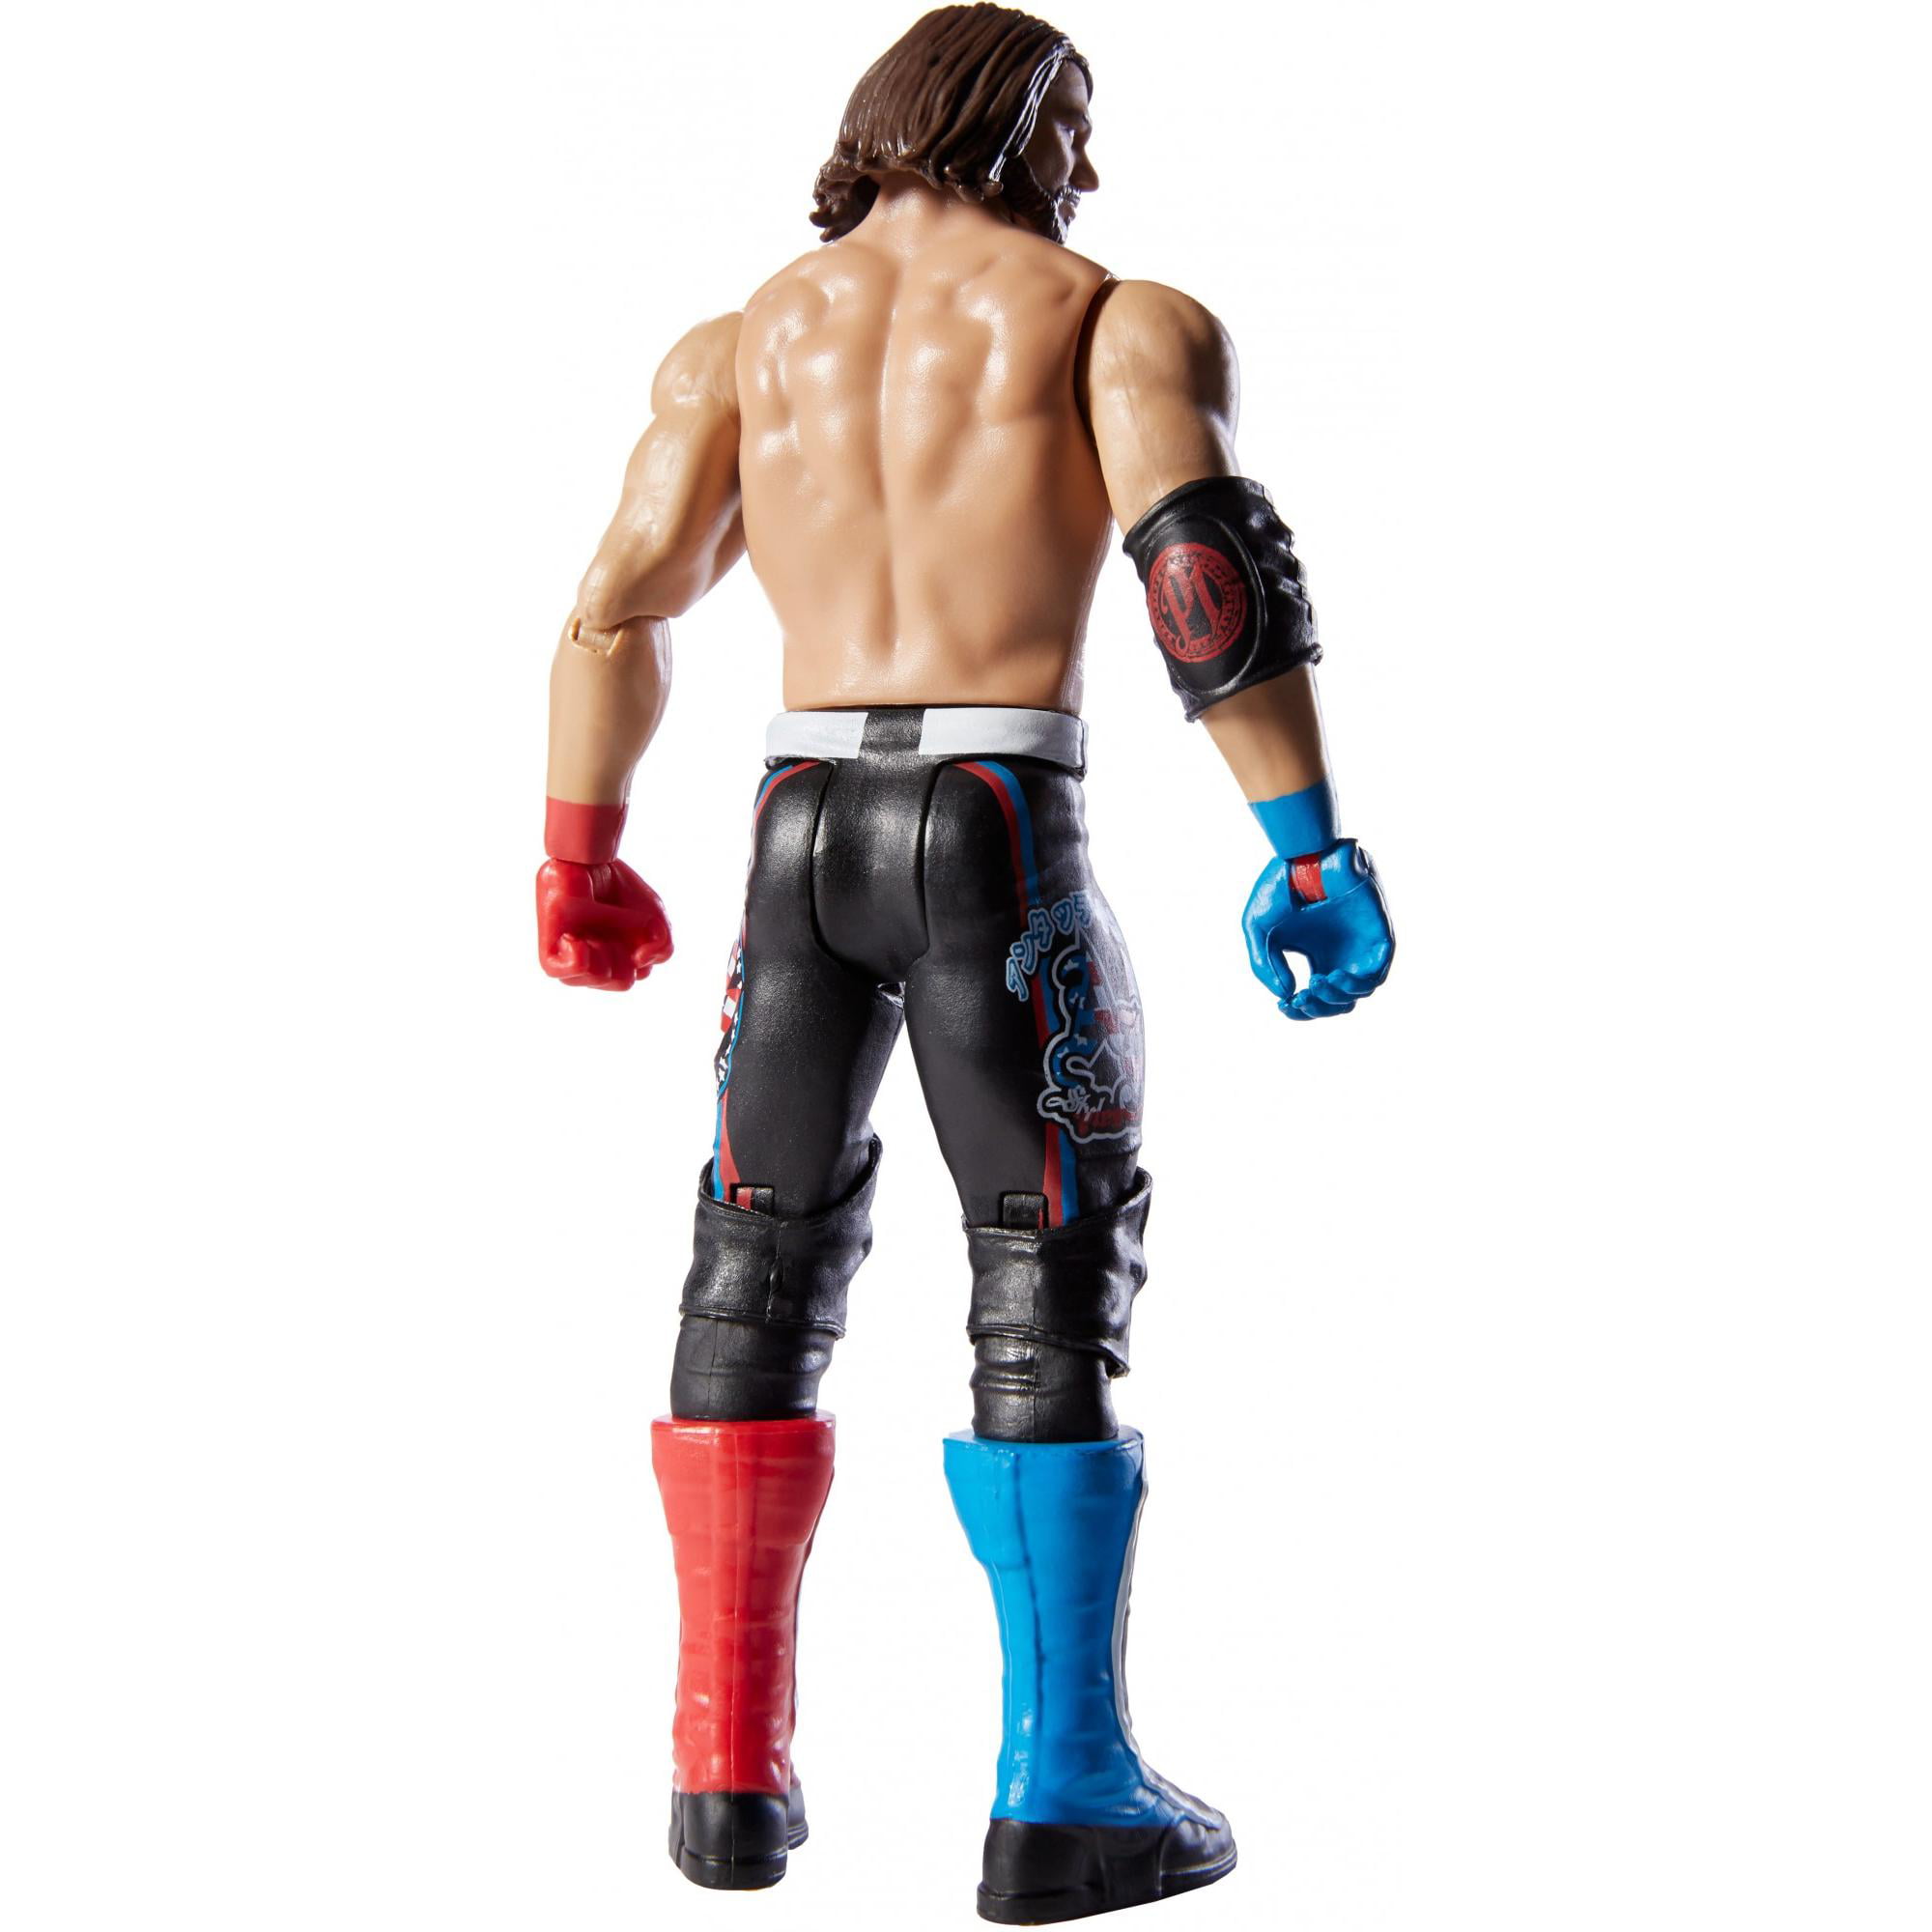 Shelf Wear New in Box Details about  / WWE Top Picks Elite Collection AJ Styles Action Figure